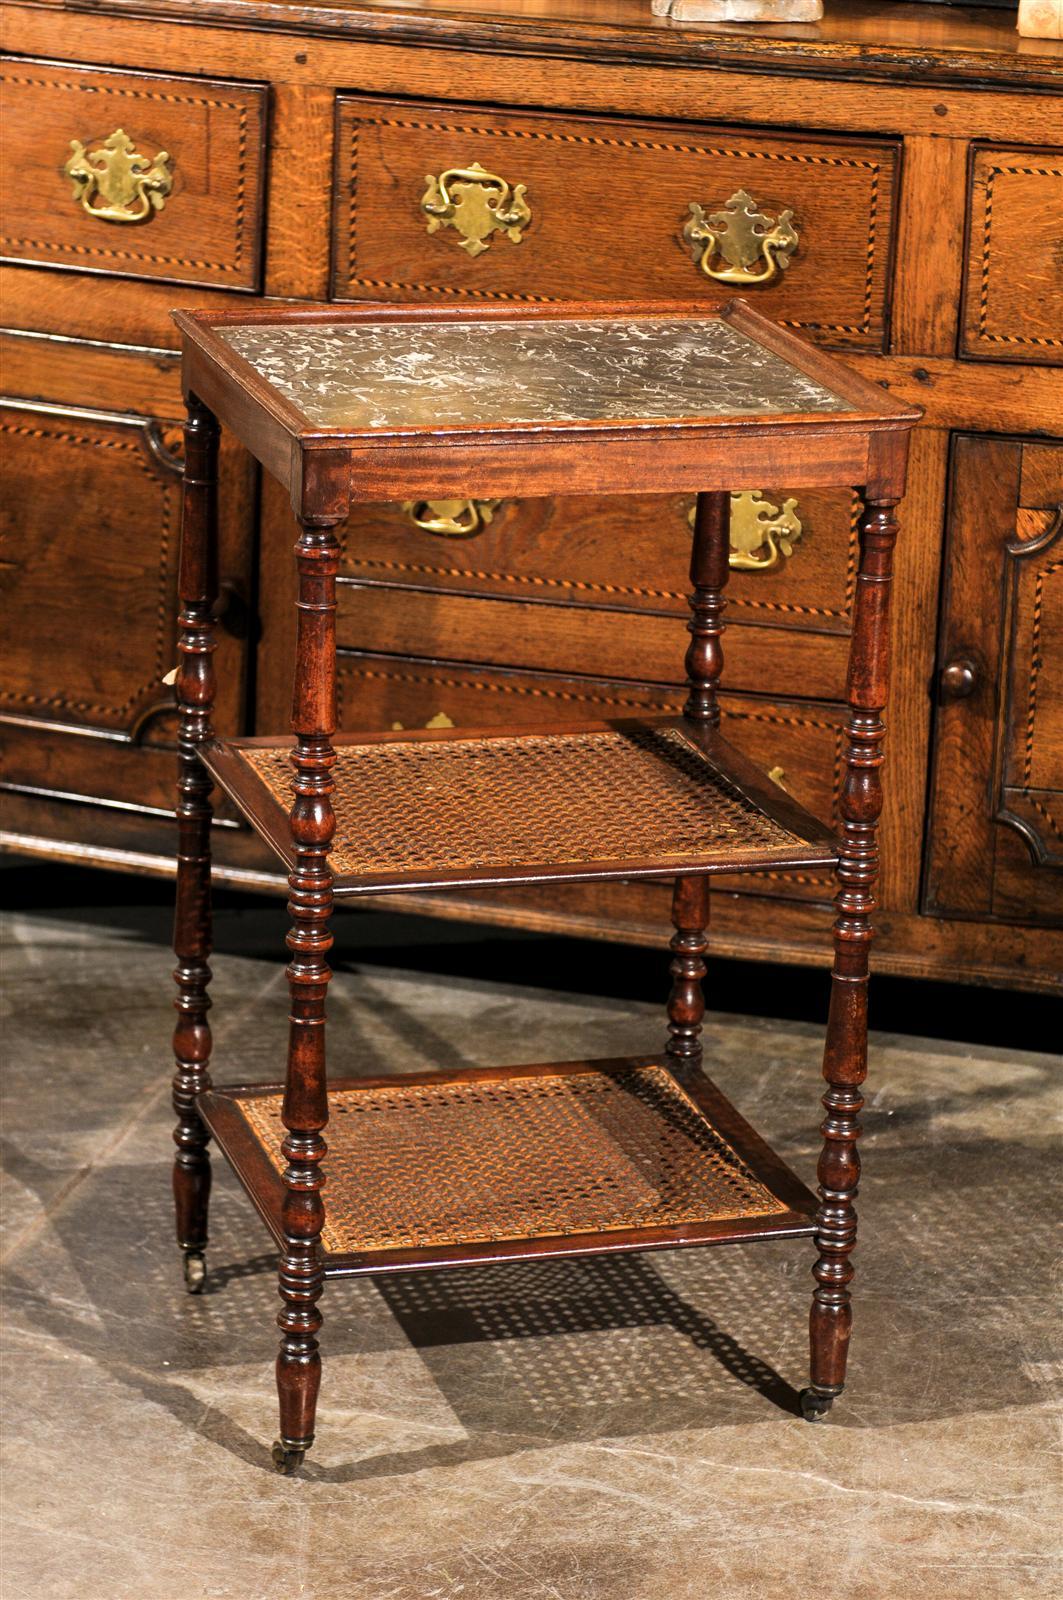 This French etagere or trolley from the mid-19th century features two cane shelves and a marble top. Four turned legs support the two shelves and the frame that holds the black and white marble top. This mid-19th century French etagere or trolley